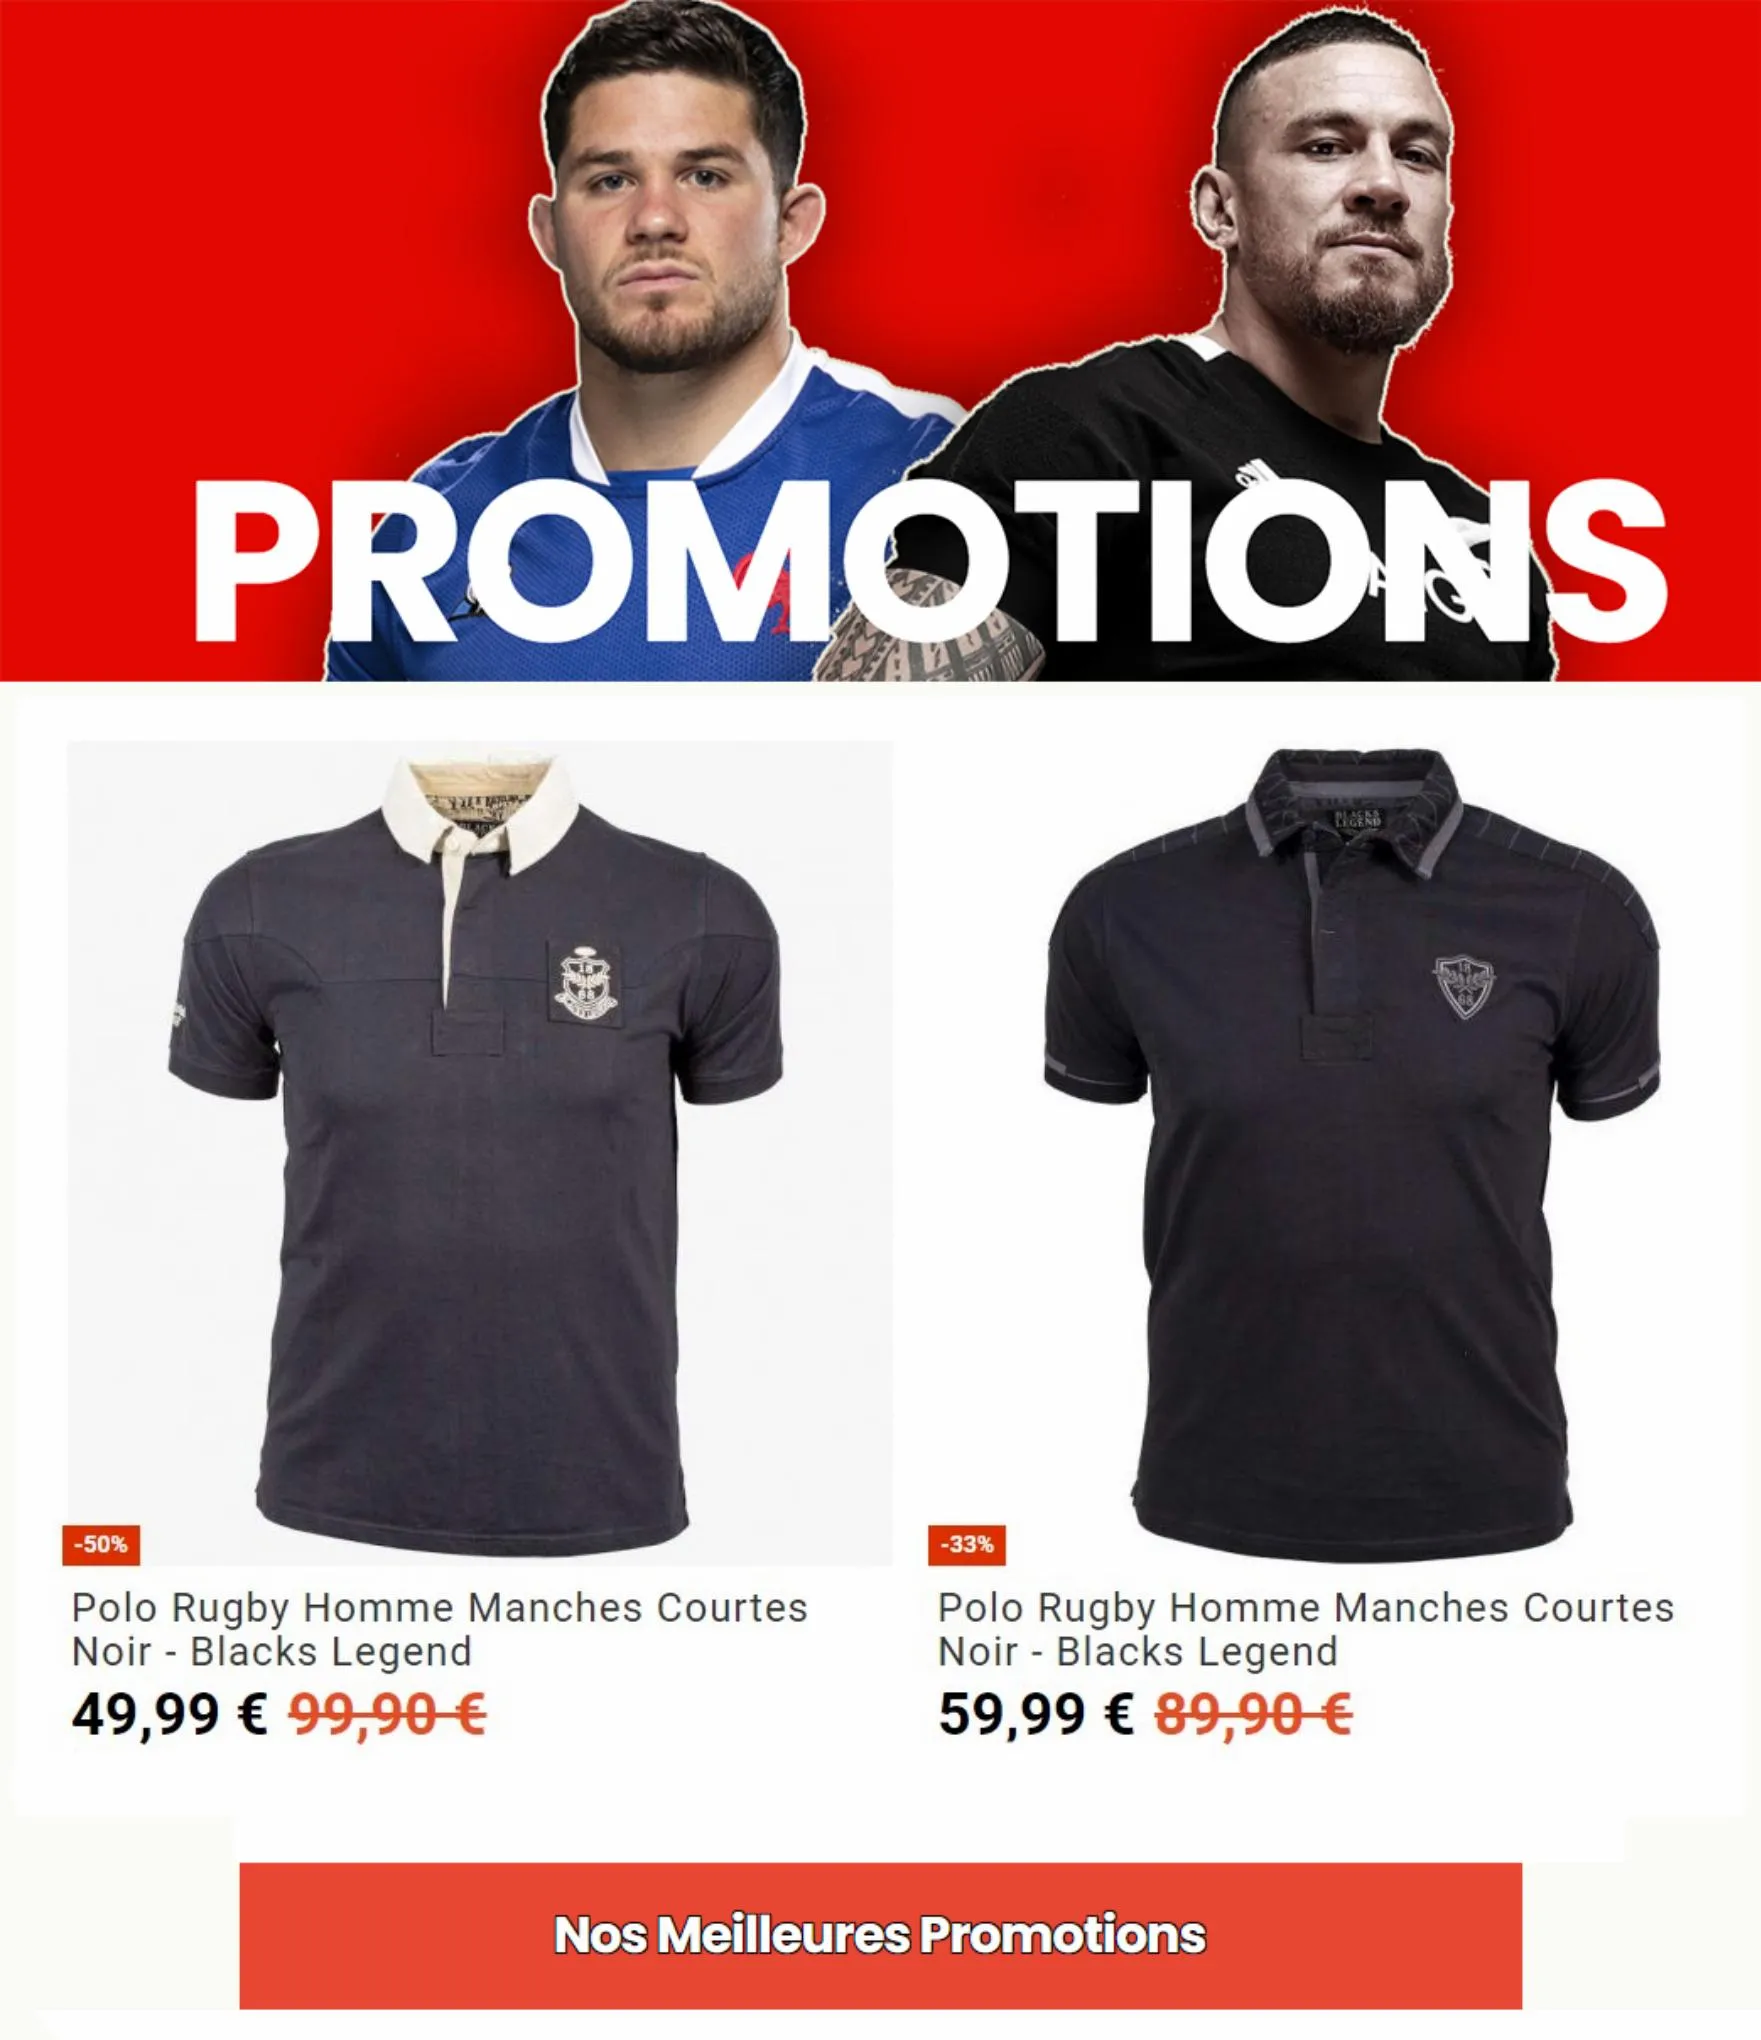 Catalogue Promotions France 2022, page 00003